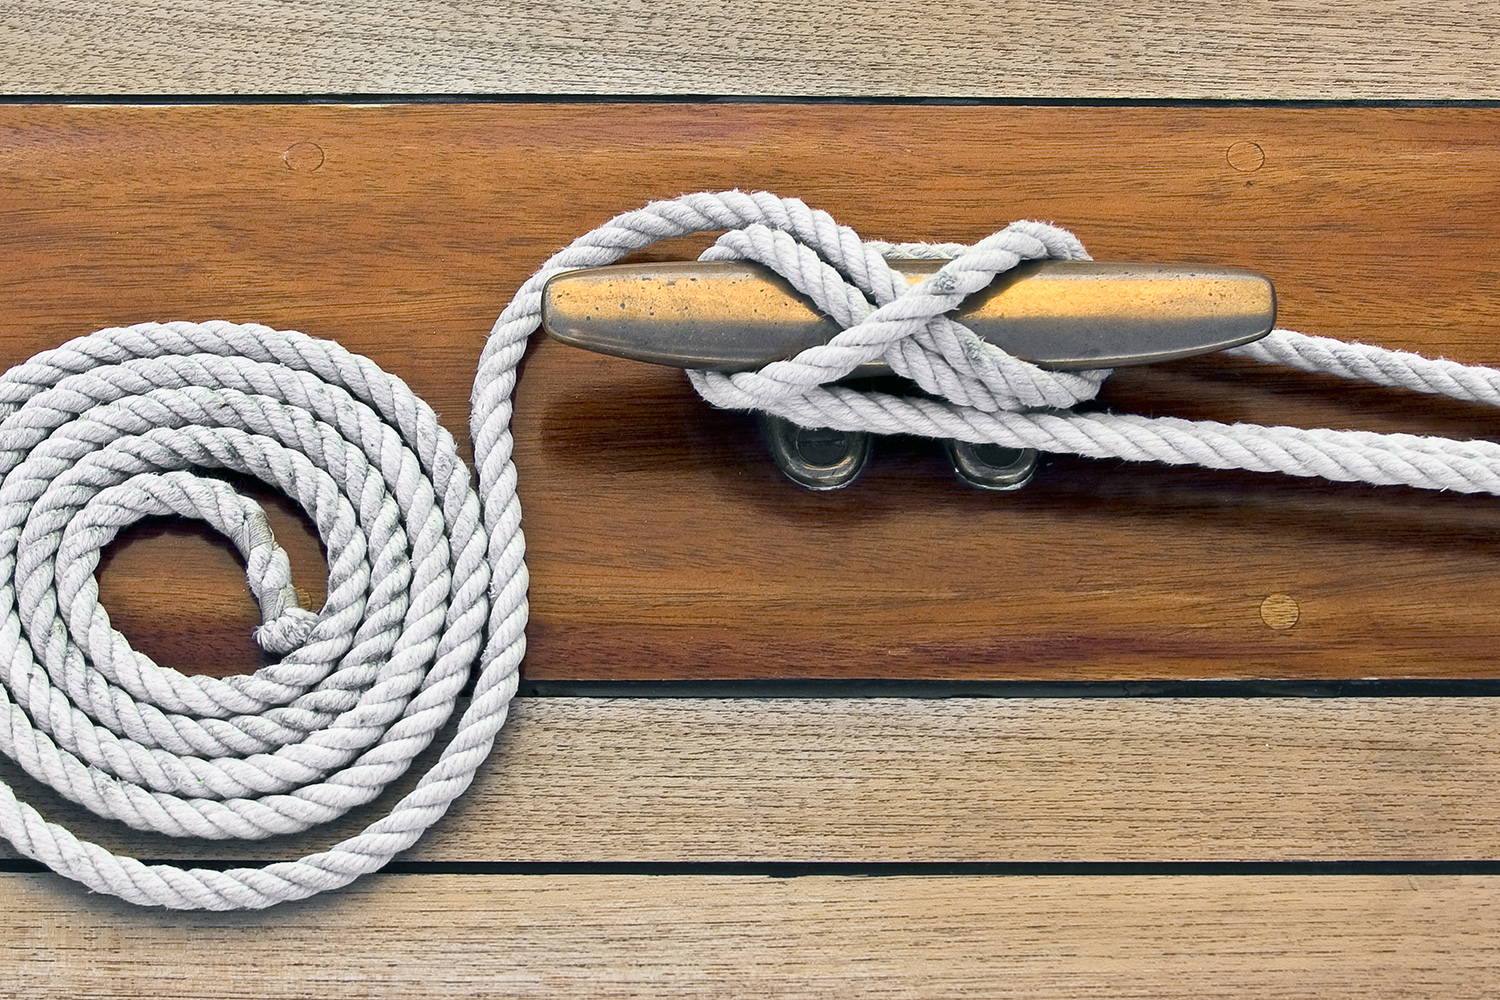 These are the 8 sailing knots you need to know when out to sea